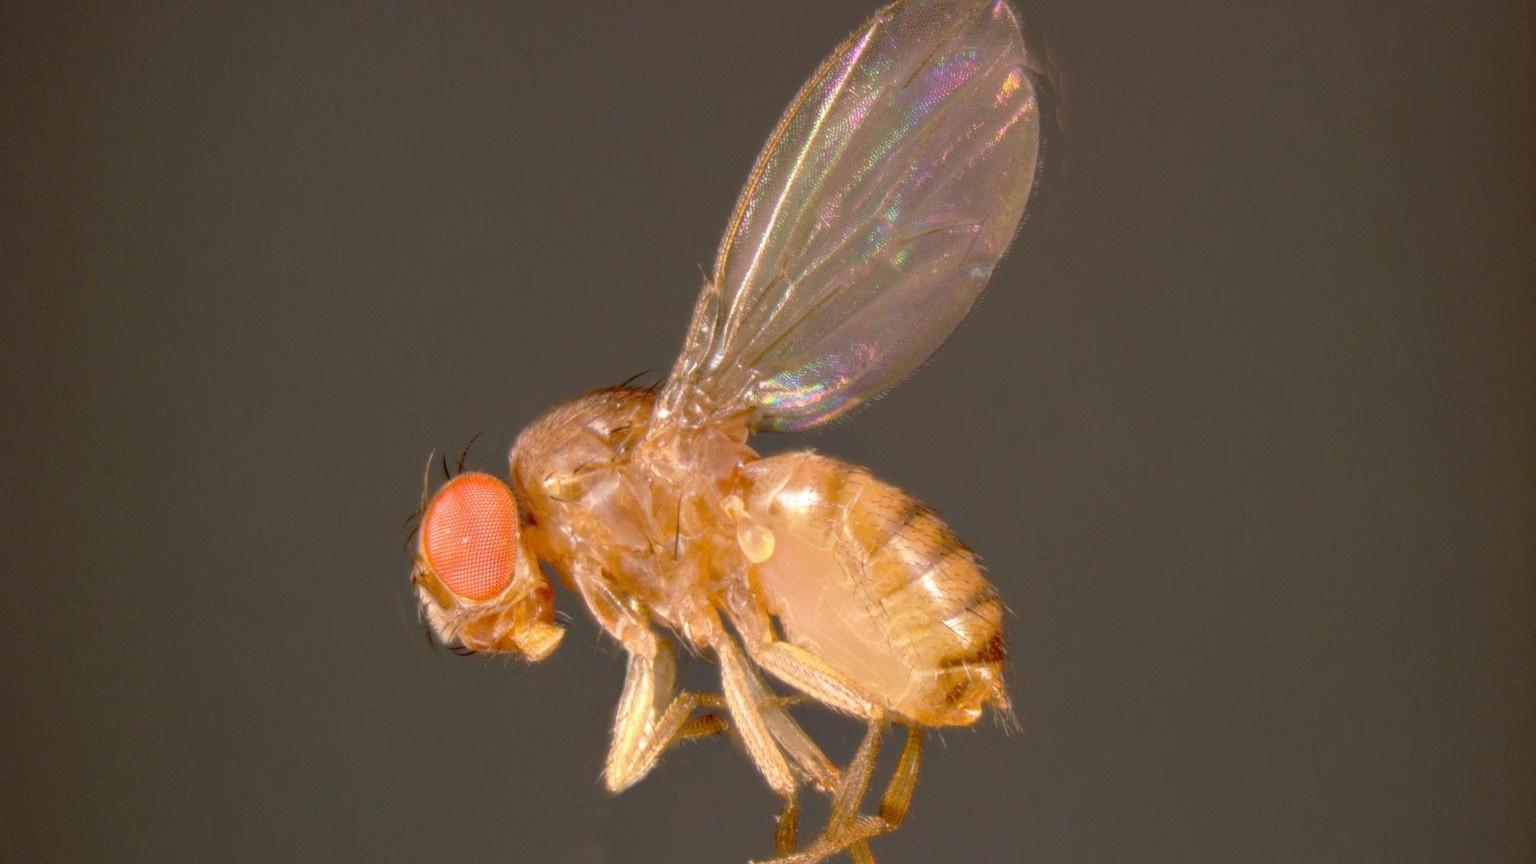 common fruit fly